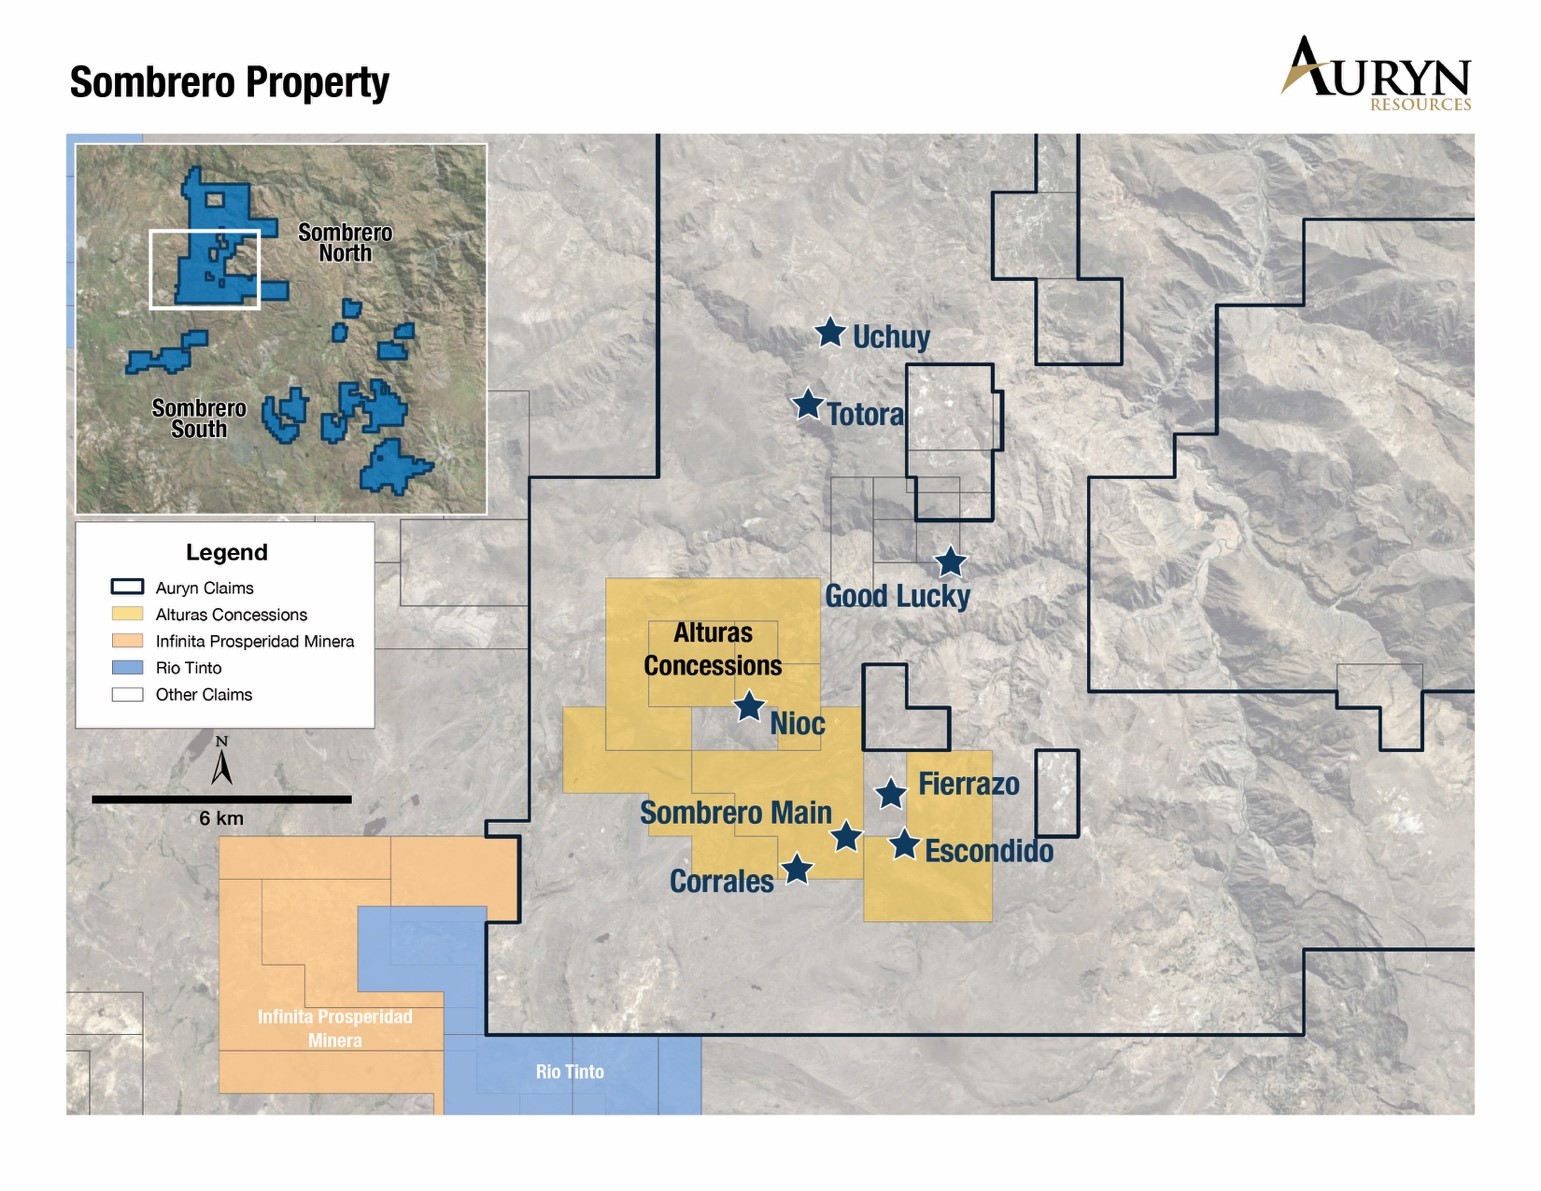 Auryn Resources Inc., Thursday, September 3, 2020, Press release picture